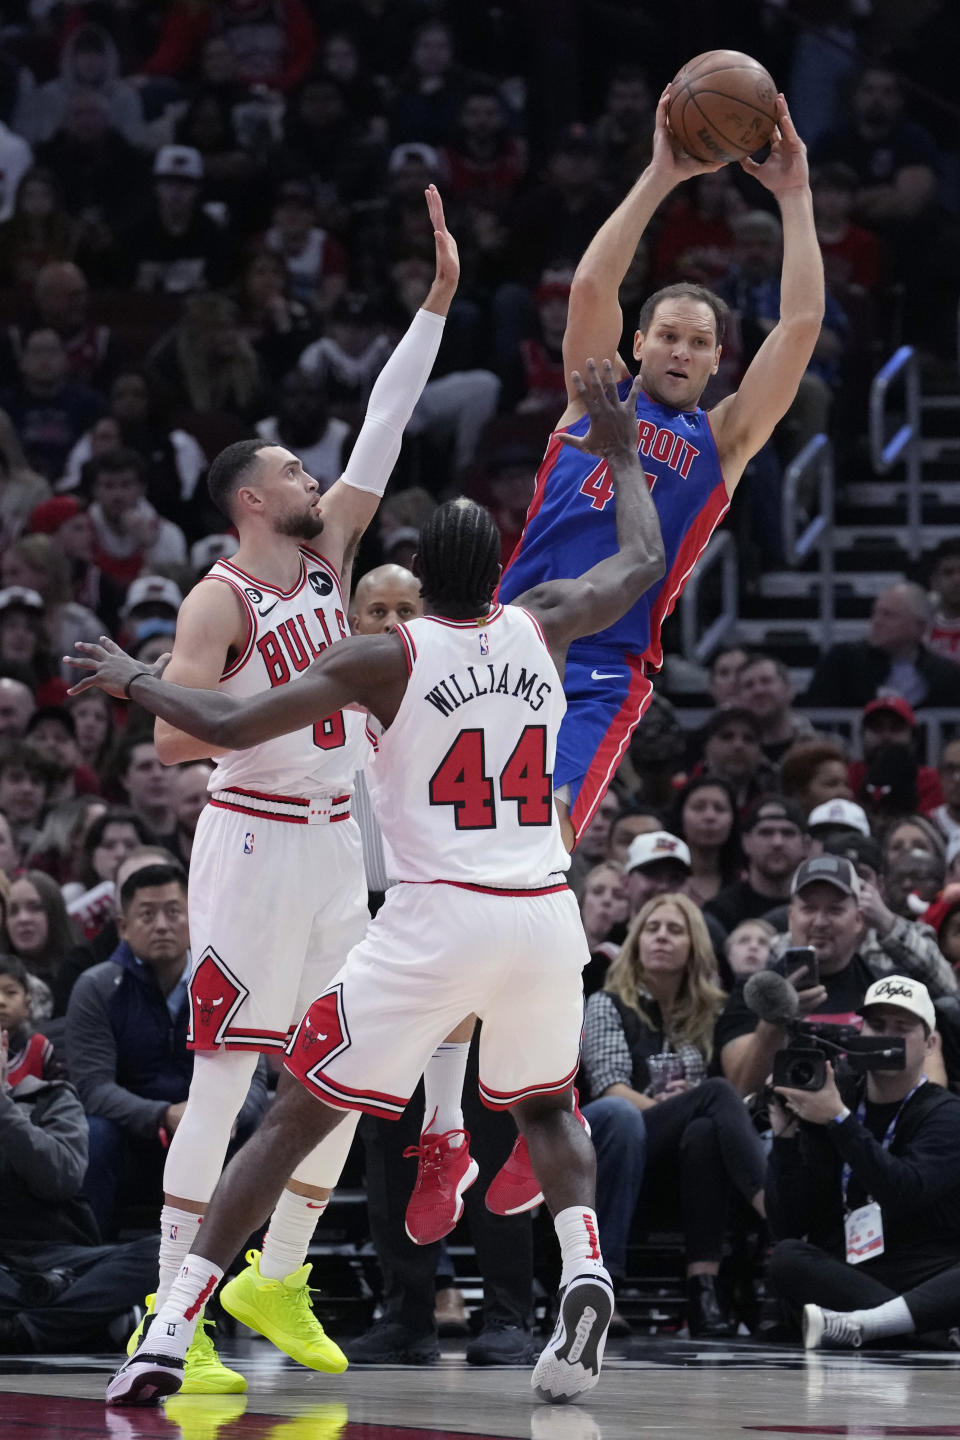 Detroit Pistons forward Bojan Bogdanovic, right, looks to pass as Chicago Bulls guard Zach LaVine, left, and forward Patrick Williams defend during the first half of an NBA basketball game in Chicago, Friday, Dec. 30, 2022. (AP Photo/Nam Y. Huh)